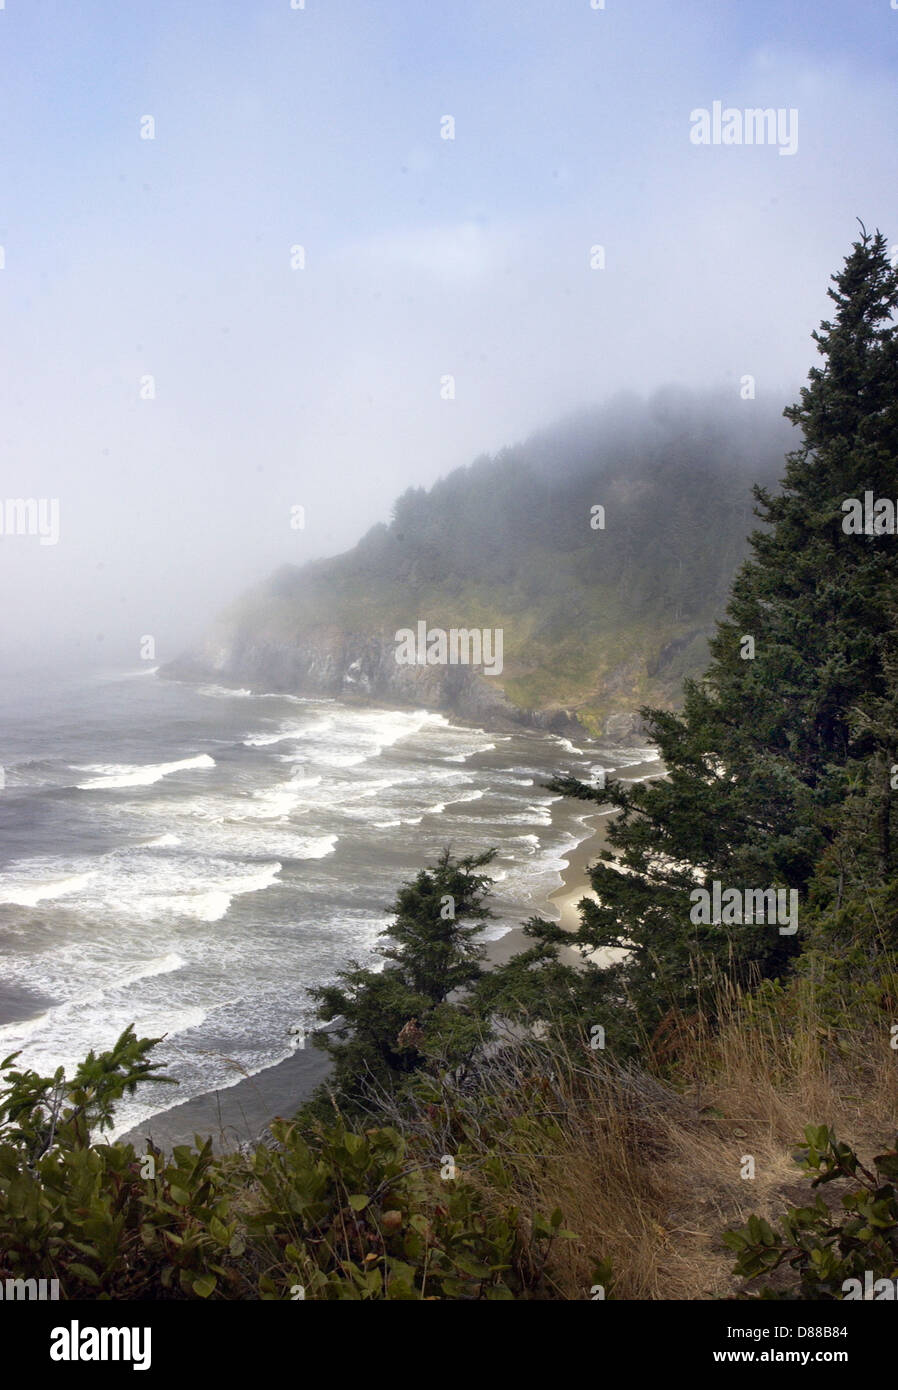 Rugged fir tree mountains with Pacific Ocean surf, beach, Spectacular views of Rugged Oregon coastline,fog, Pacific Northwest, Stock Photo